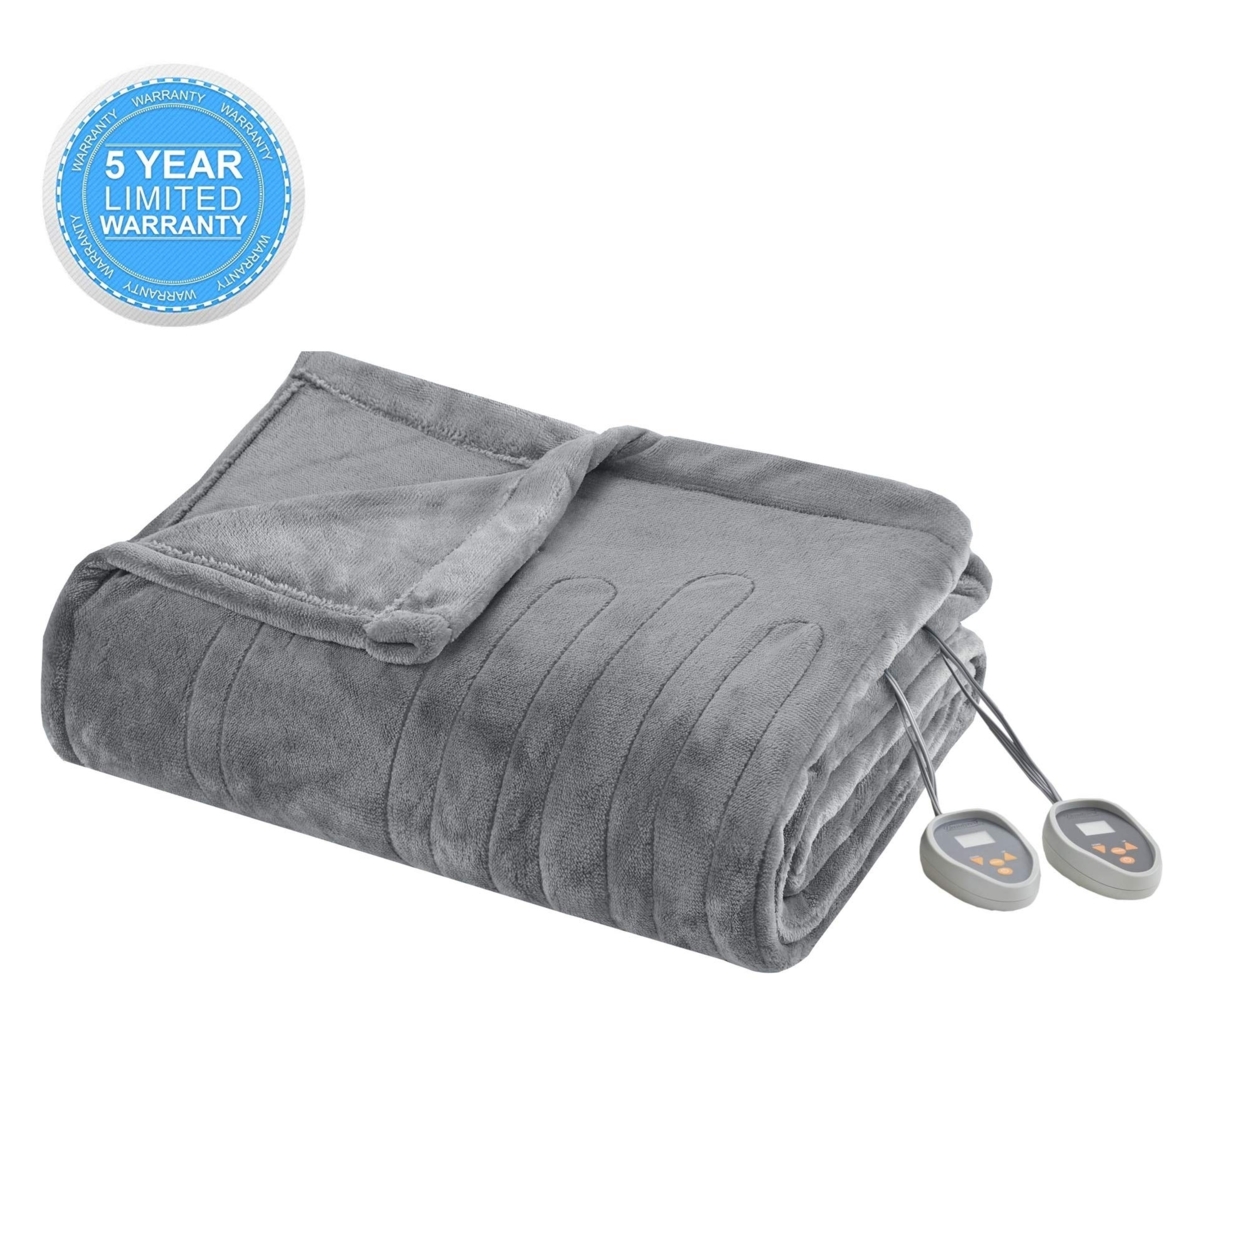 Beautyrest Heated Plush Solid Microlight Blanket, King, Grey - image 4 of 6